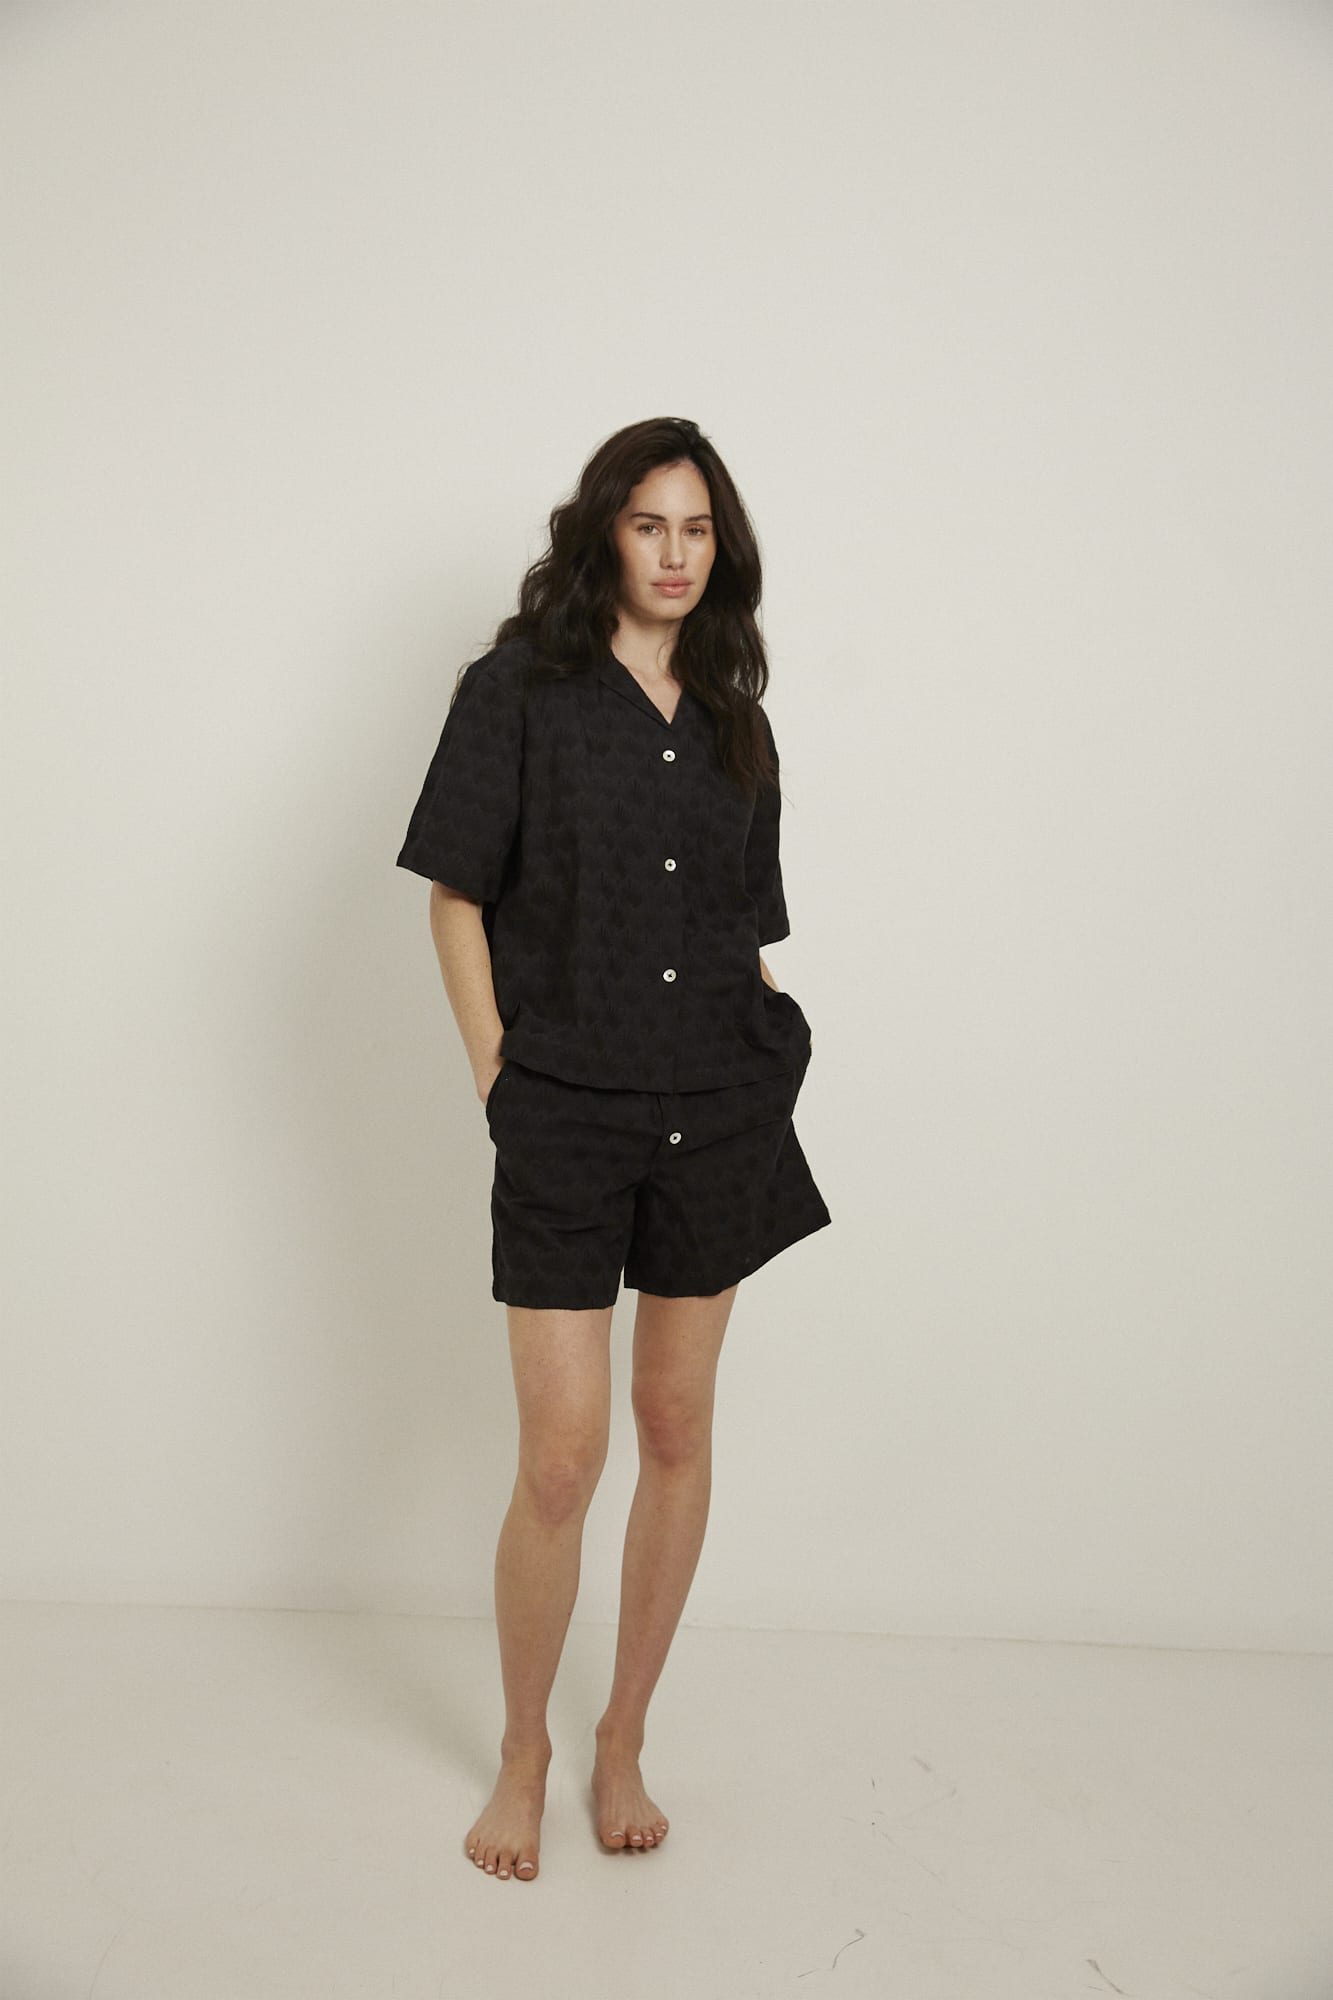 Women’s pyjama set including a short sleeve shirt and shorts. Made from 100% organic cotton, in black colour featuring delicate all over embroidery. The shirt has shell buttons, a front pocket and a back pleat with locker loop detail.  The shorts feature natural shell buttons and an elasticated waistband for comfort.